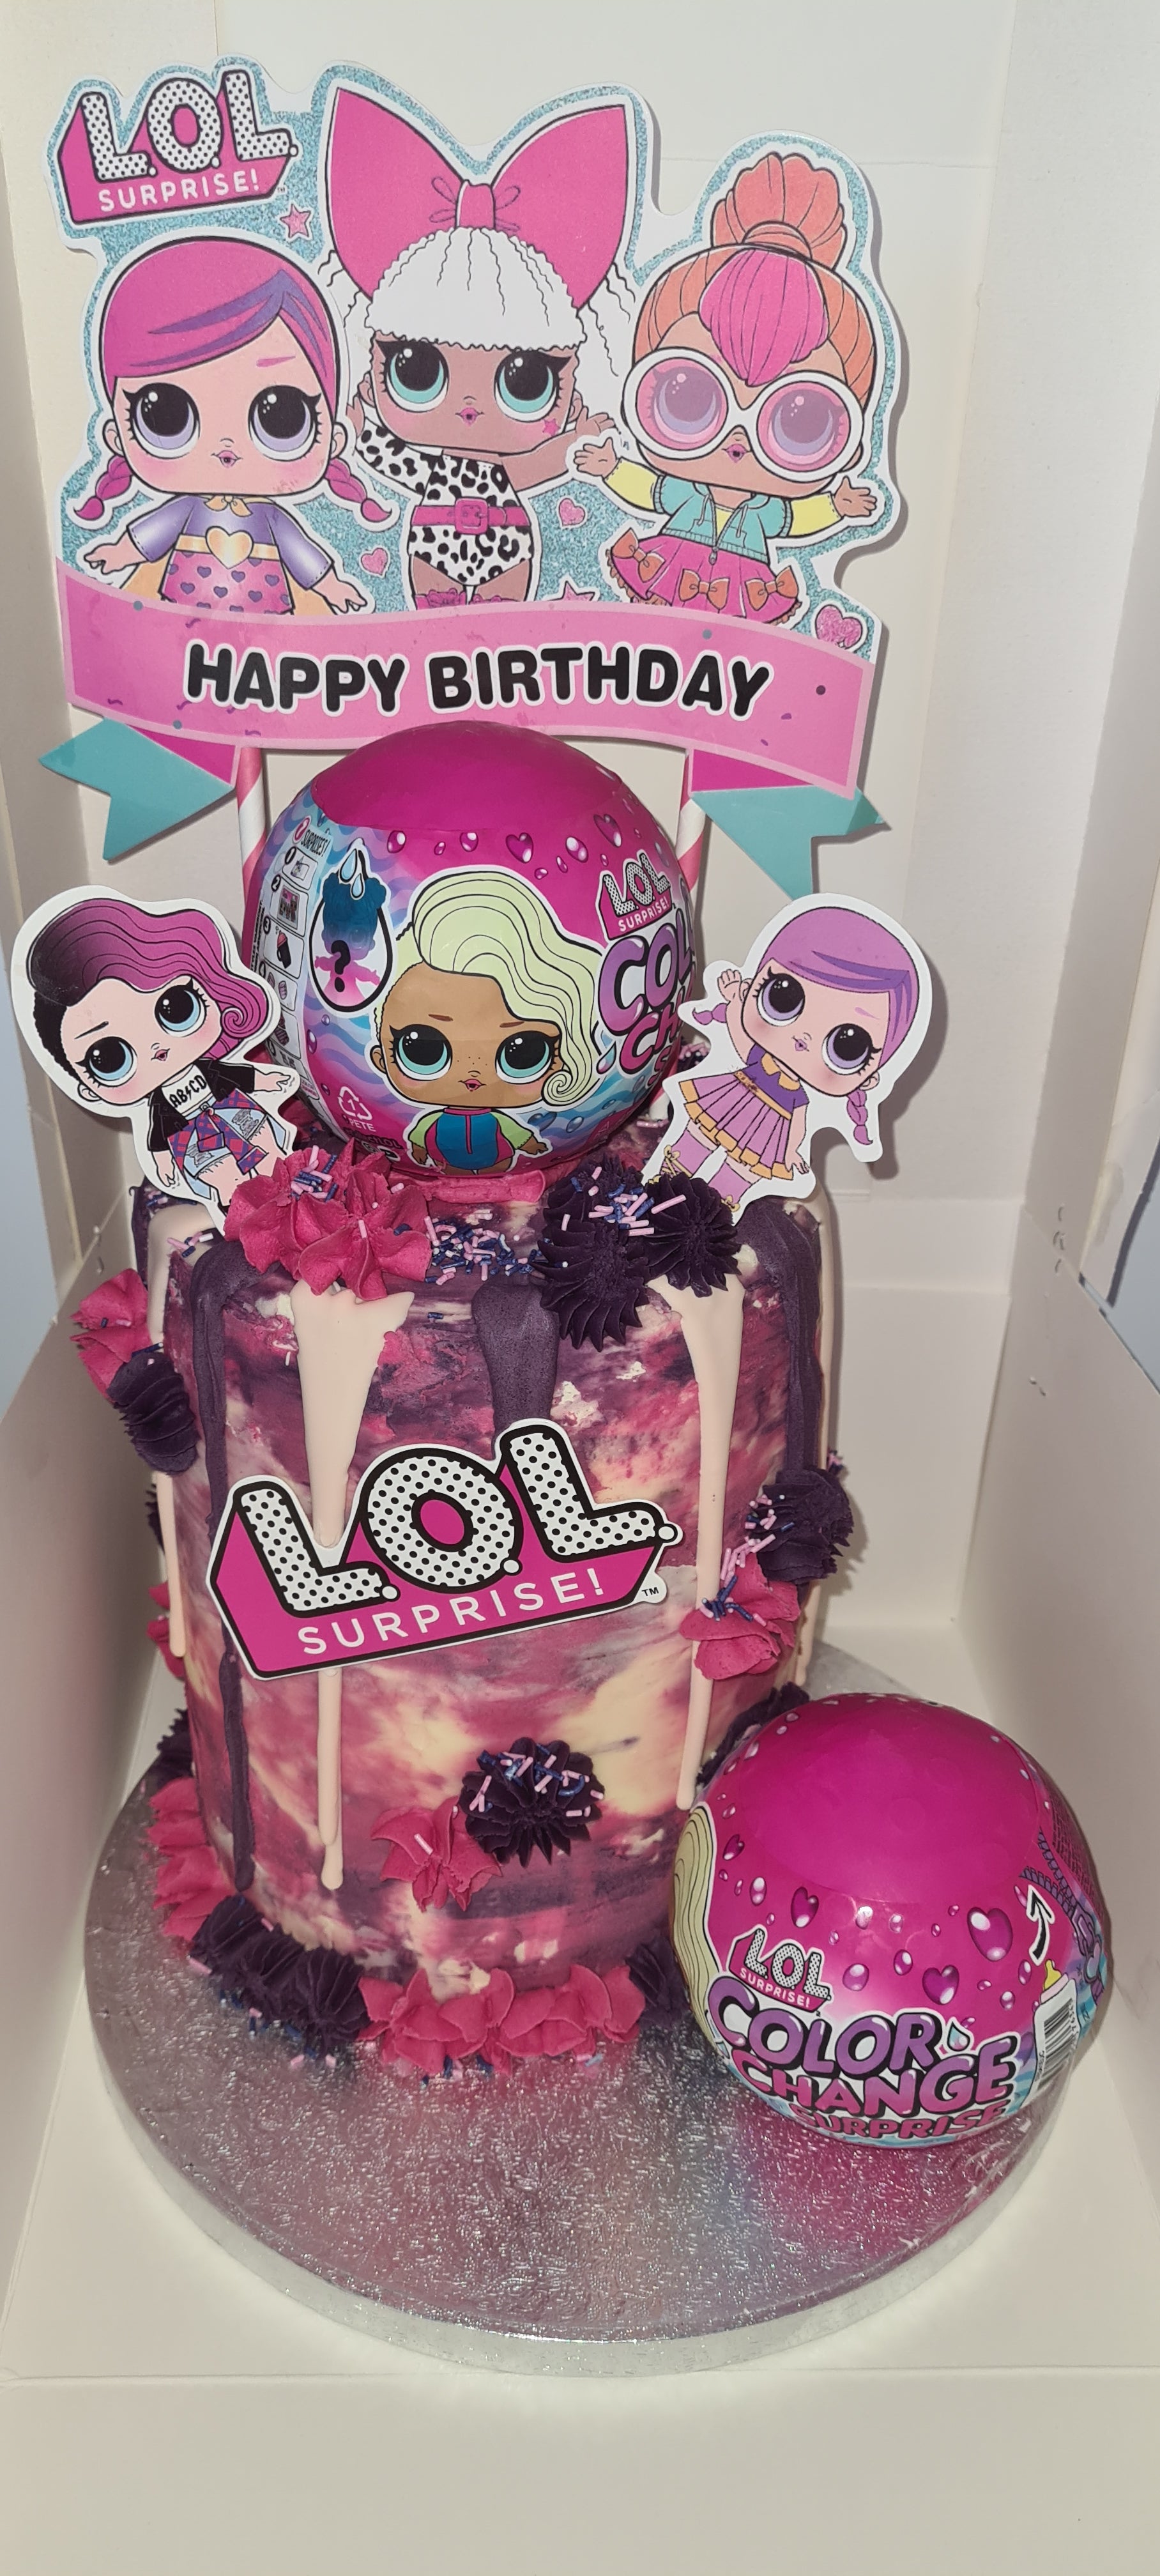 A pink happy birthday bespoke cake with a LOL surprise theme